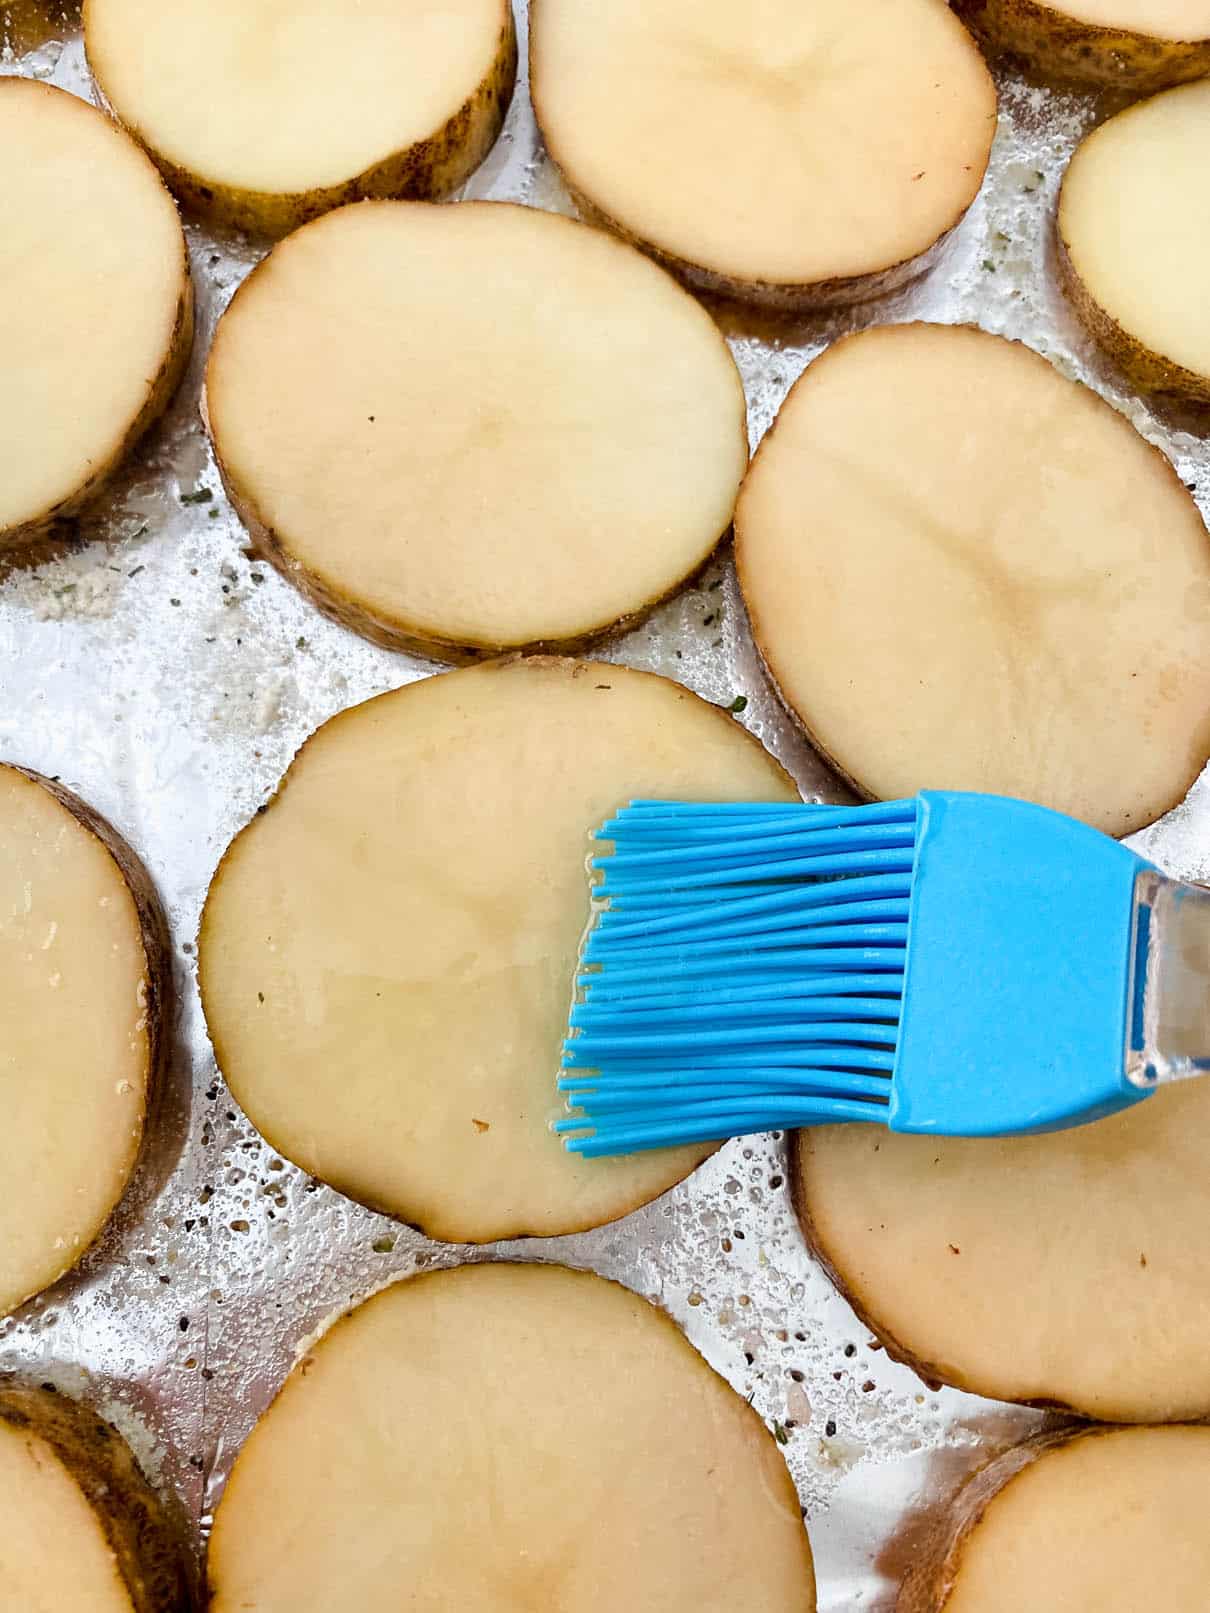 Brushing olive oil on sliced potatoes with a blue pastry brush